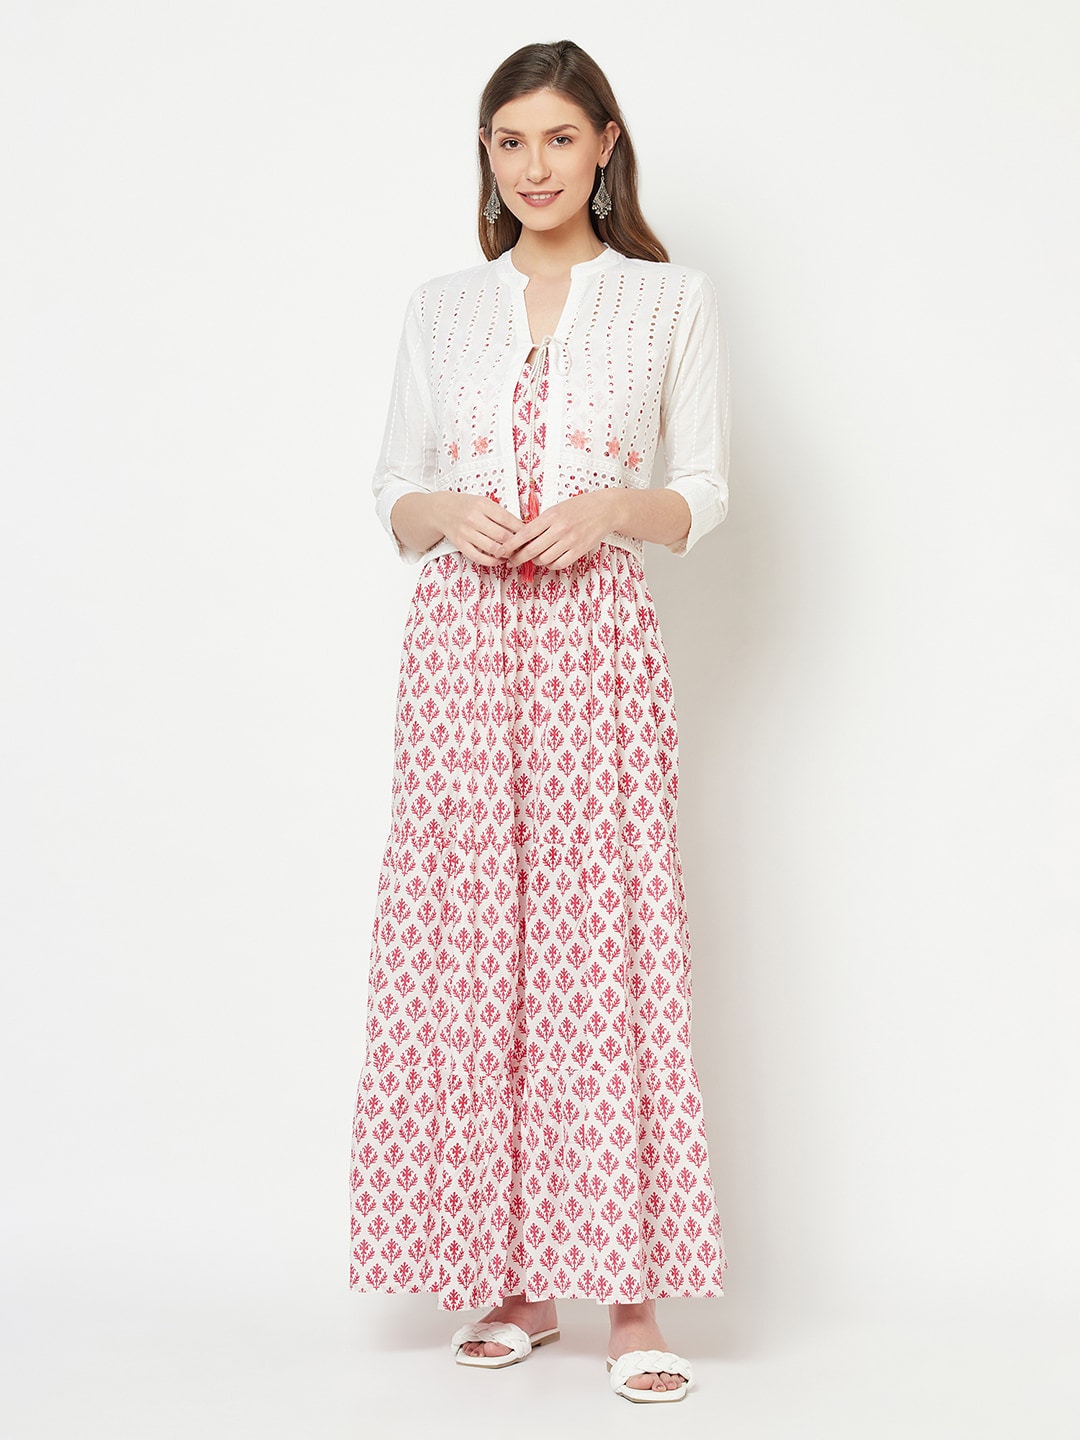 KALINI Red & White Ethnic Motifs Cotton Maxi Dress with Jacket Price in India